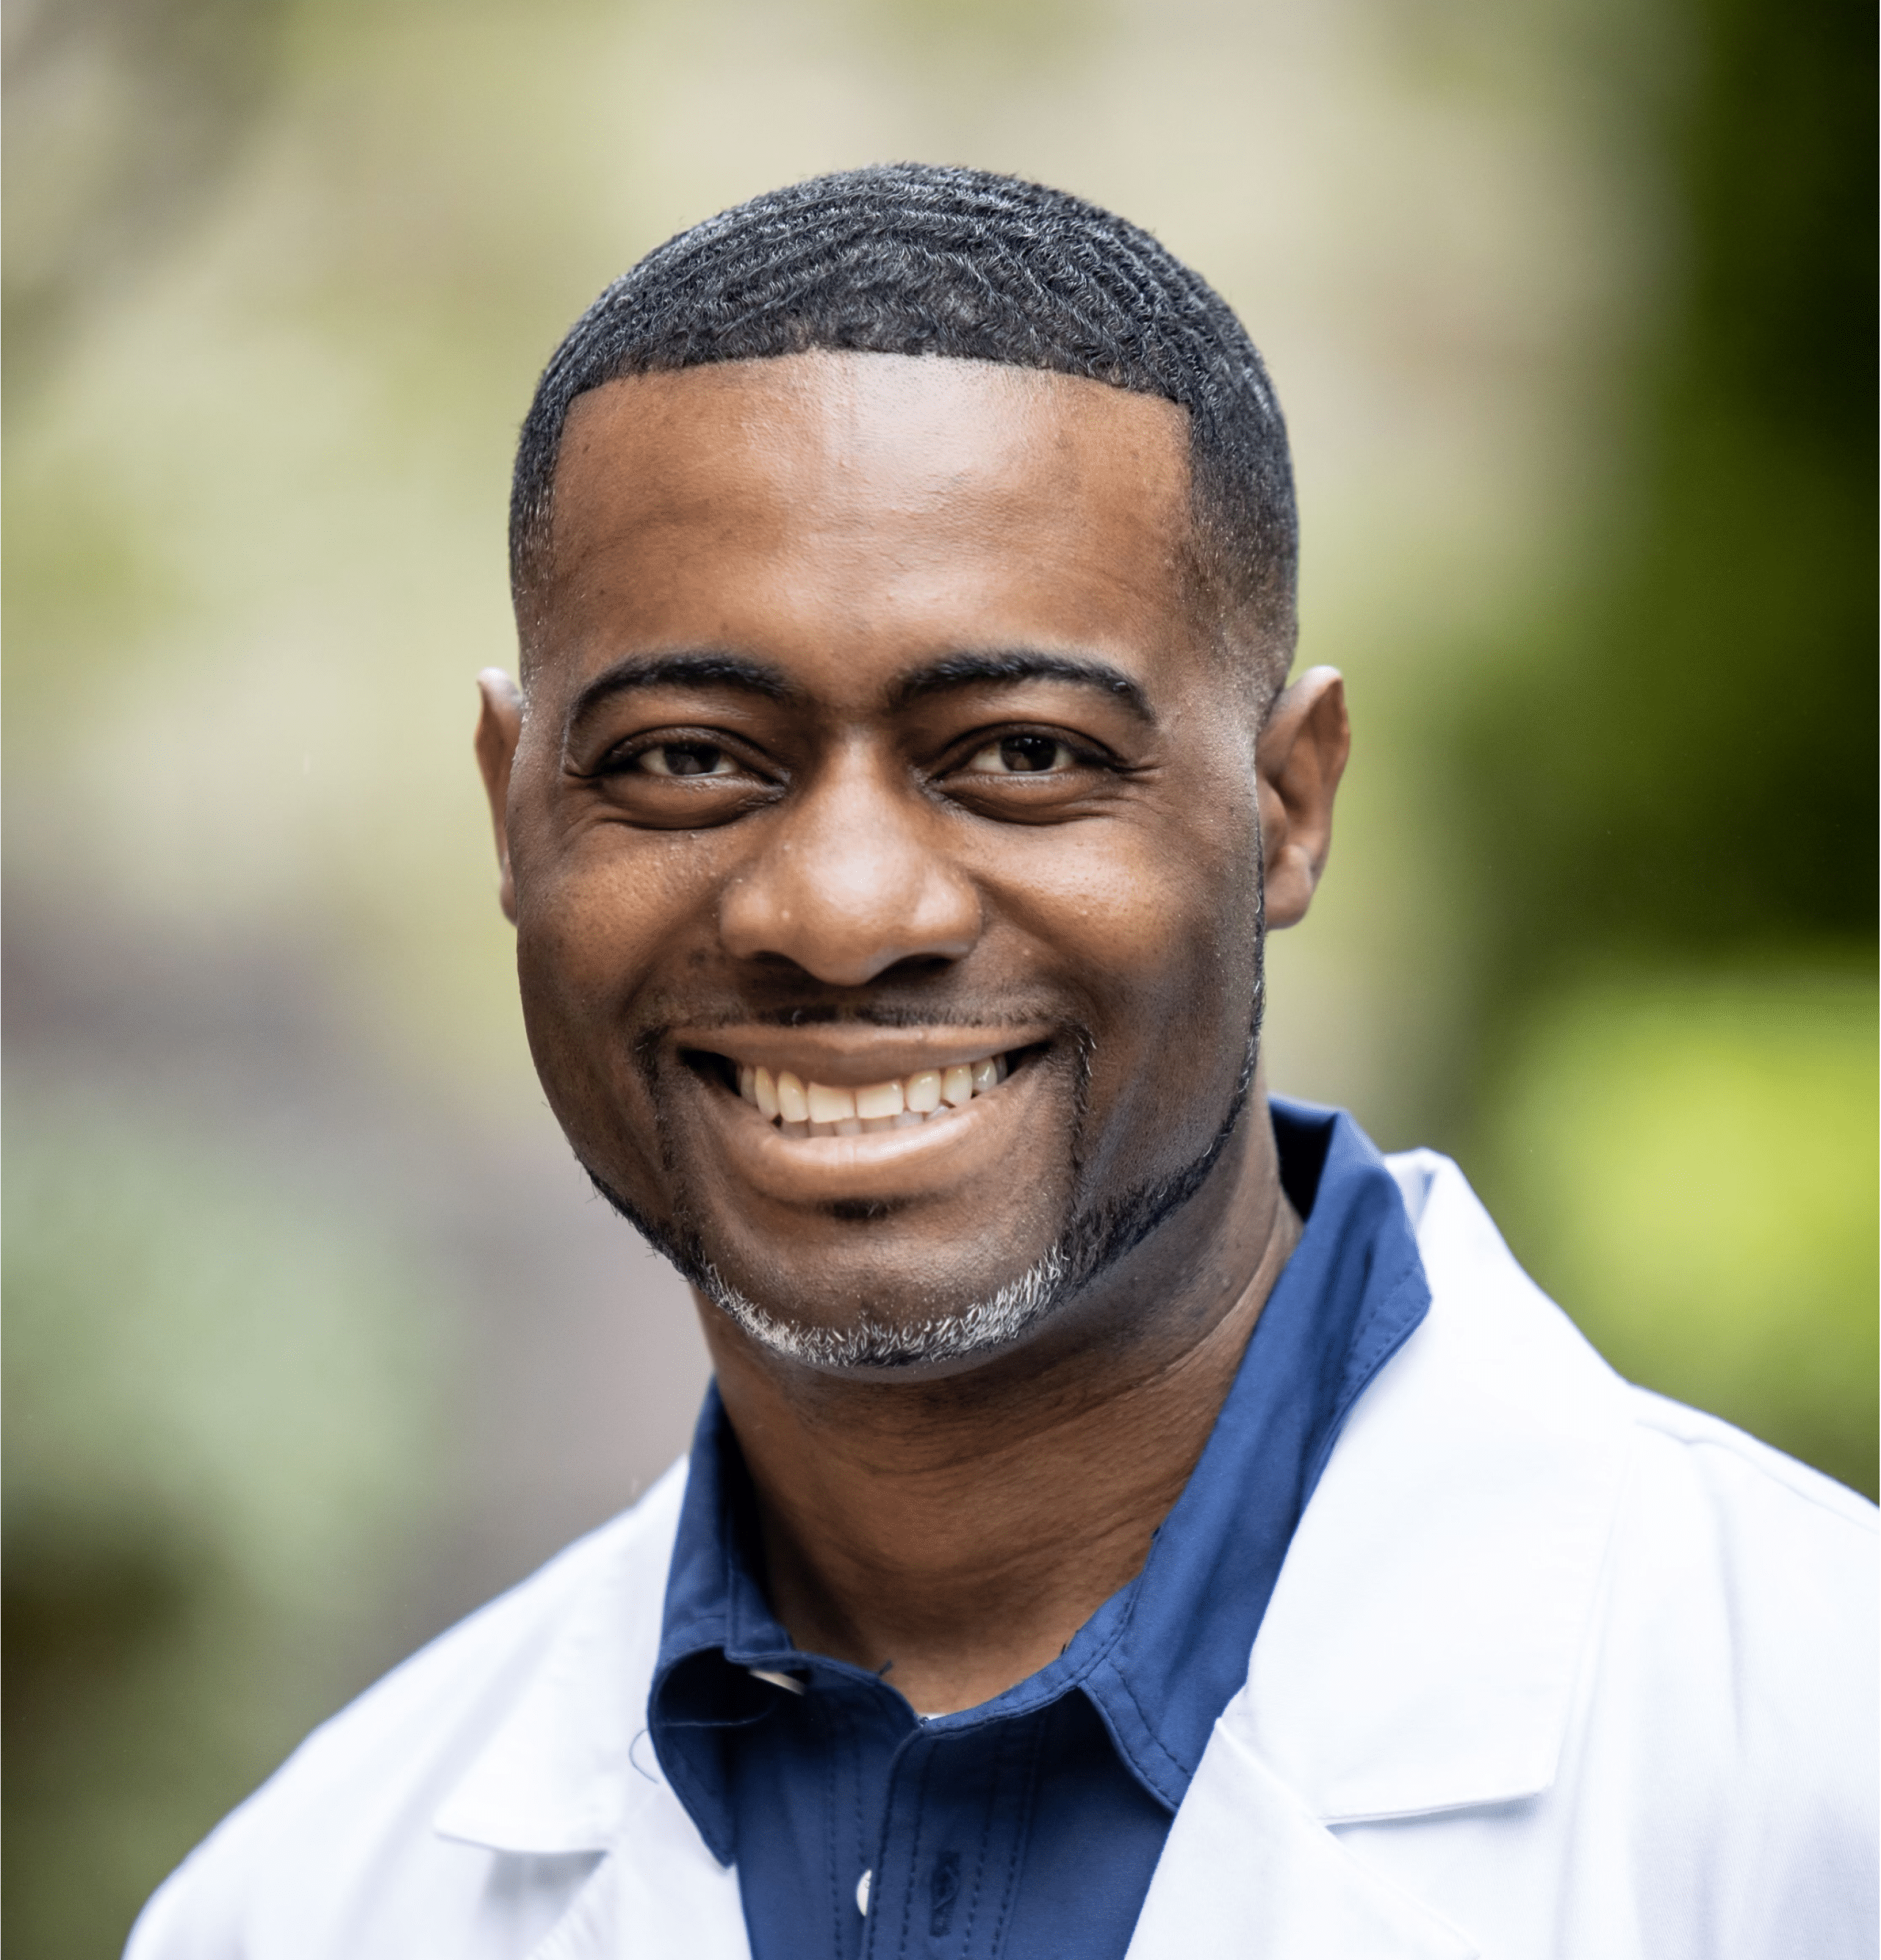 Cameron Lewis, DDS, OMFS, completed his B.S. from Xavier University of Louisiana, New Orleans, LA, and his Doctor of Dental Surgery at Howard University College of Dentistry. Area of practice: Oral Surgery, Implant Surgery, Trauma, Wisdom Teeth Extractions, IV Sedation.